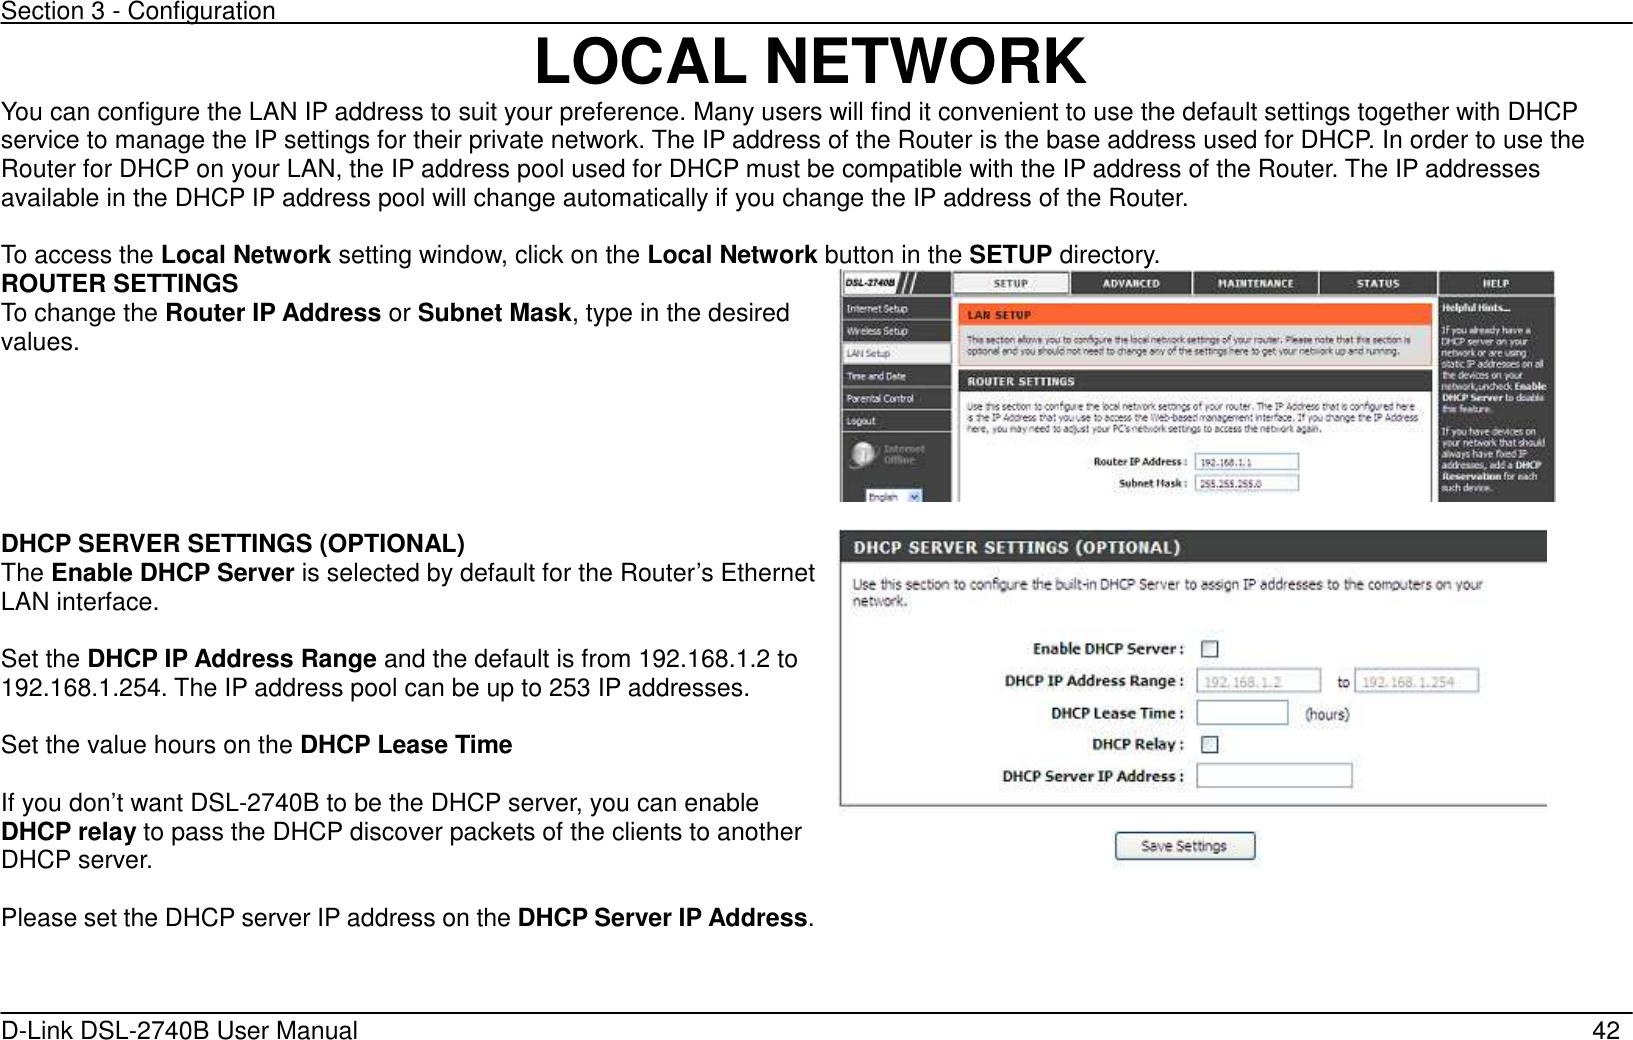 Section 3 - Configuration   D-Link DSL-2740B User Manual                                                  42 LOCAL NETWORK You can configure the LAN IP address to suit your preference. Many users will find it convenient to use the default settings together with DHCP service to manage the IP settings for their private network. The IP address of the Router is the base address used for DHCP. In order to use the Router for DHCP on your LAN, the IP address pool used for DHCP must be compatible with the IP address of the Router. The IP addresses available in the DHCP IP address pool will change automatically if you change the IP address of the Router.    To access the Local Network setting window, click on the Local Network button in the SETUP directory. ROUTER SETTINGS To change the Router IP Address or Subnet Mask, type in the desired values.        DHCP SERVER SETTINGS (OPTIONAL) The Enable DHCP Server is selected by default for the Router’s Ethernet LAN interface.    Set the DHCP IP Address Range and the default is from 192.168.1.2 to 192.168.1.254. The IP address pool can be up to 253 IP addresses.  Set the value hours on the DHCP Lease Time  If you don’t want DSL-2740B to be the DHCP server, you can enable DHCP relay to pass the DHCP discover packets of the clients to another DHCP server.  Please set the DHCP server IP address on the DHCP Server IP Address.    